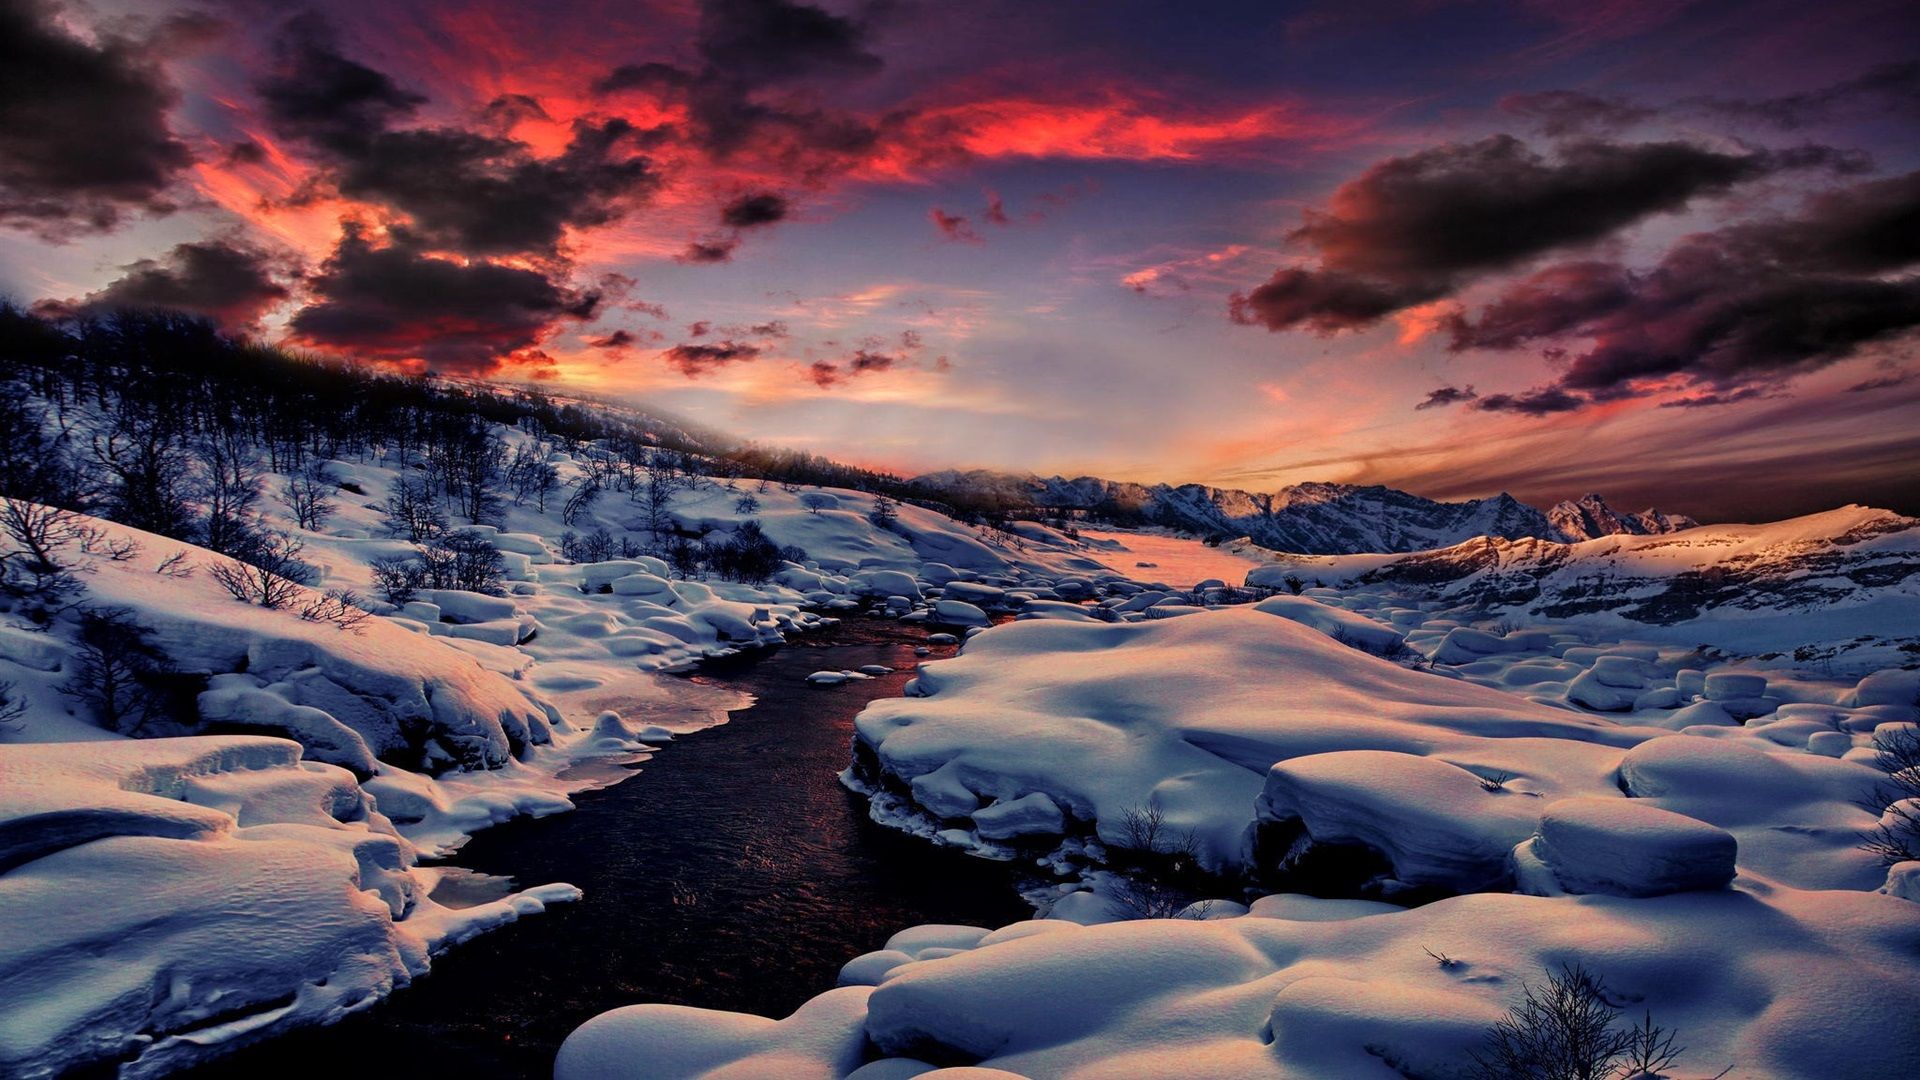 Wallpaper Winter, snow, river, mountain, forest, sunset 1920x1080 Full HD 2K Picture, Image